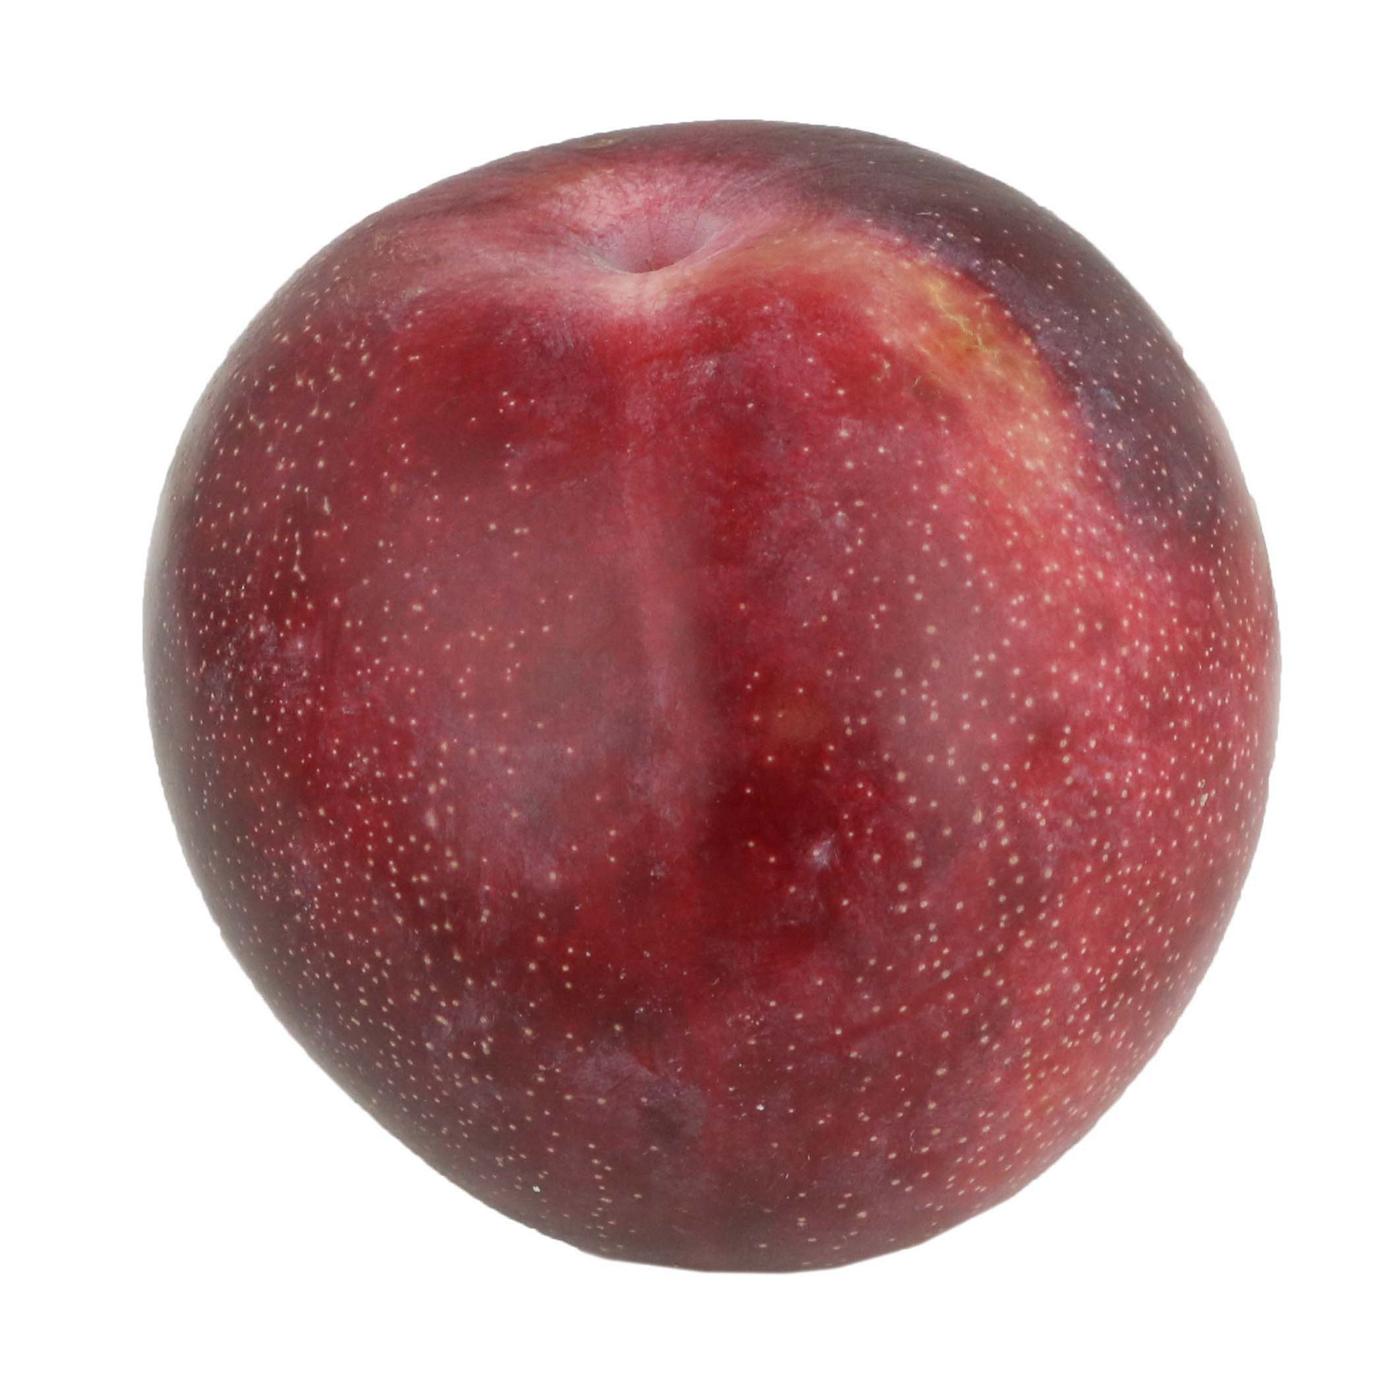 Fresh Red Plumcot; image 2 of 2